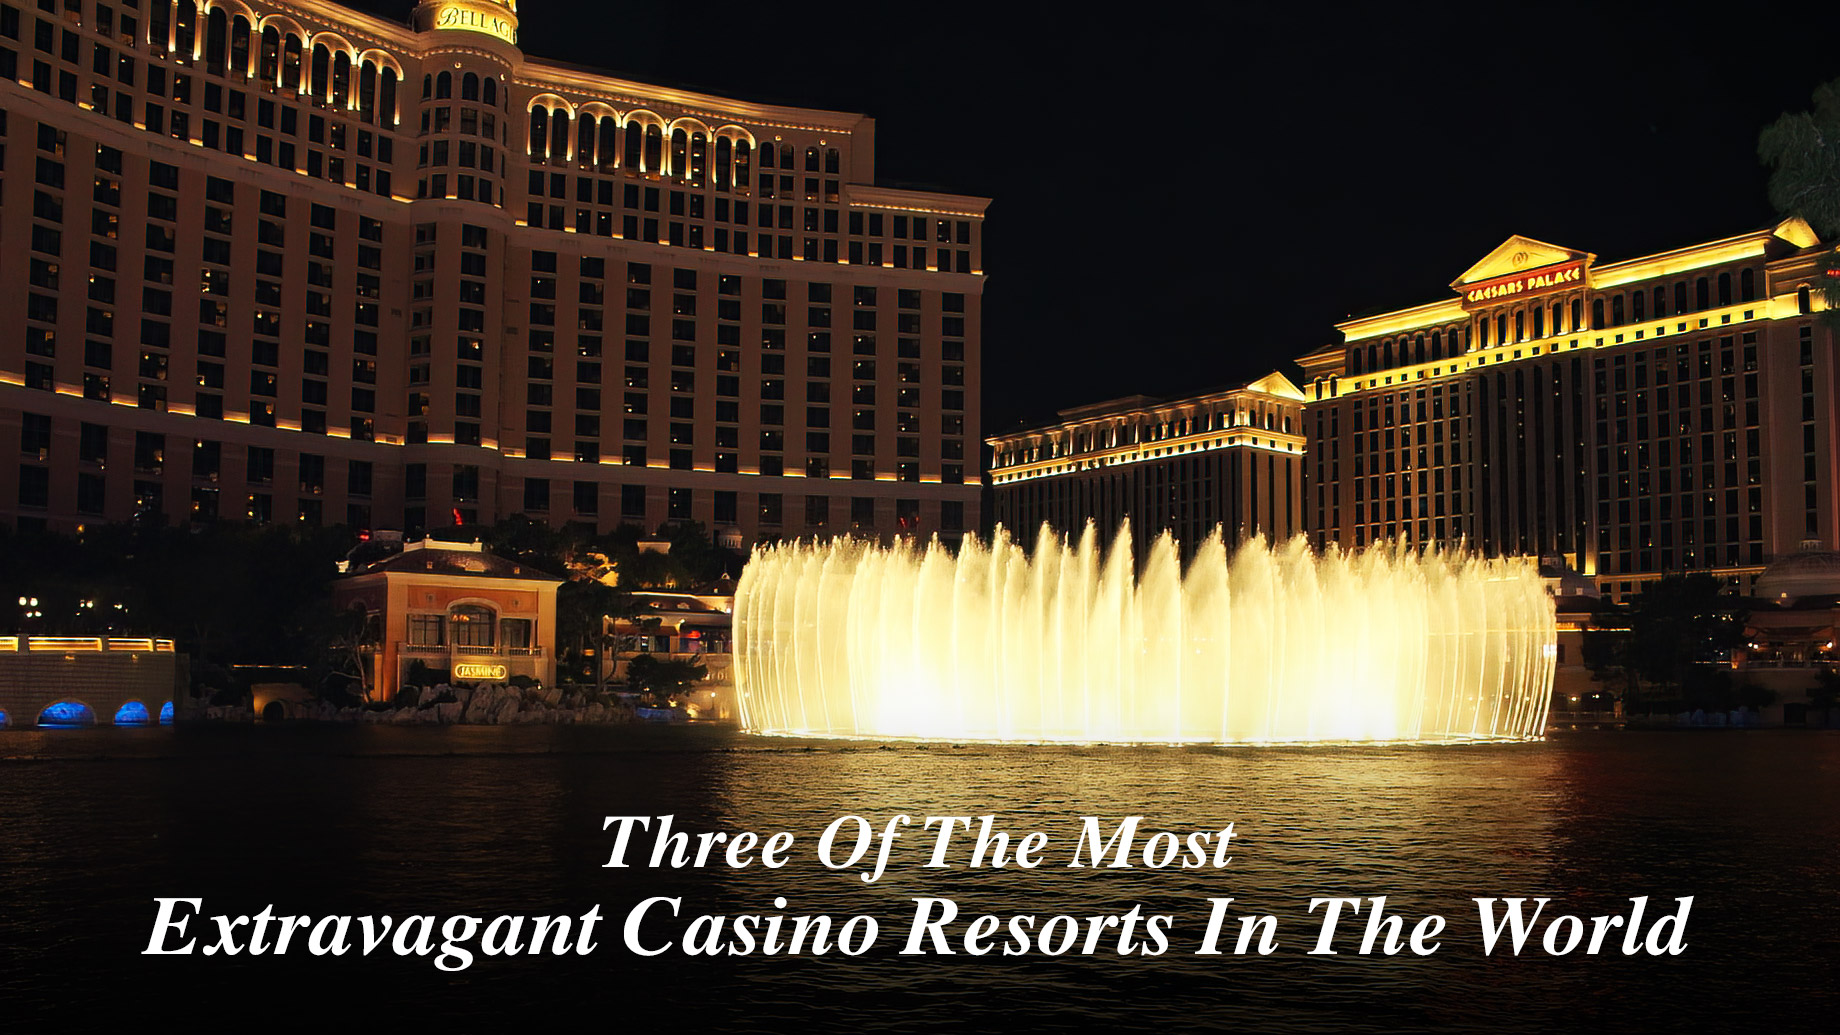 Three Of The Most Extravagant Casino Resorts In The World